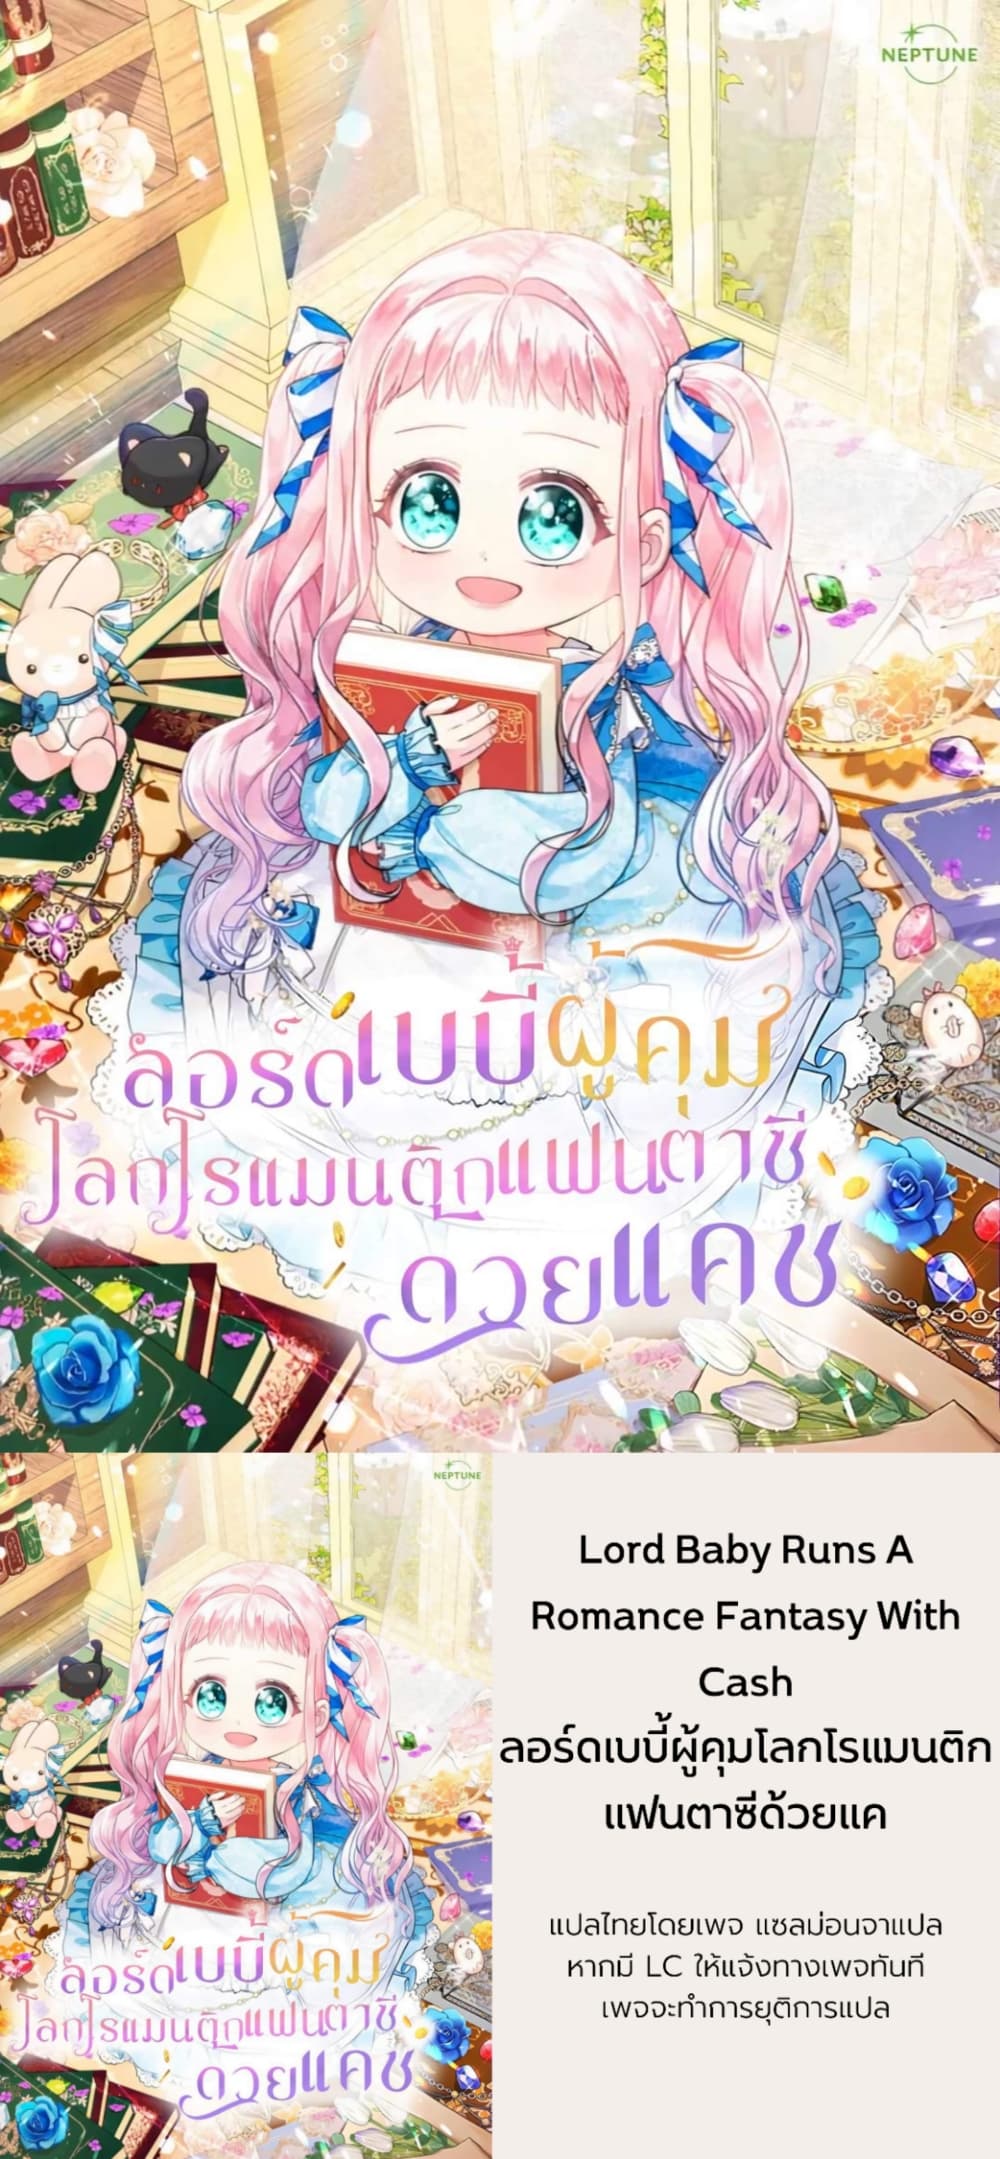 Lord Baby Runs a Romance Fantasy With Cash 5-5